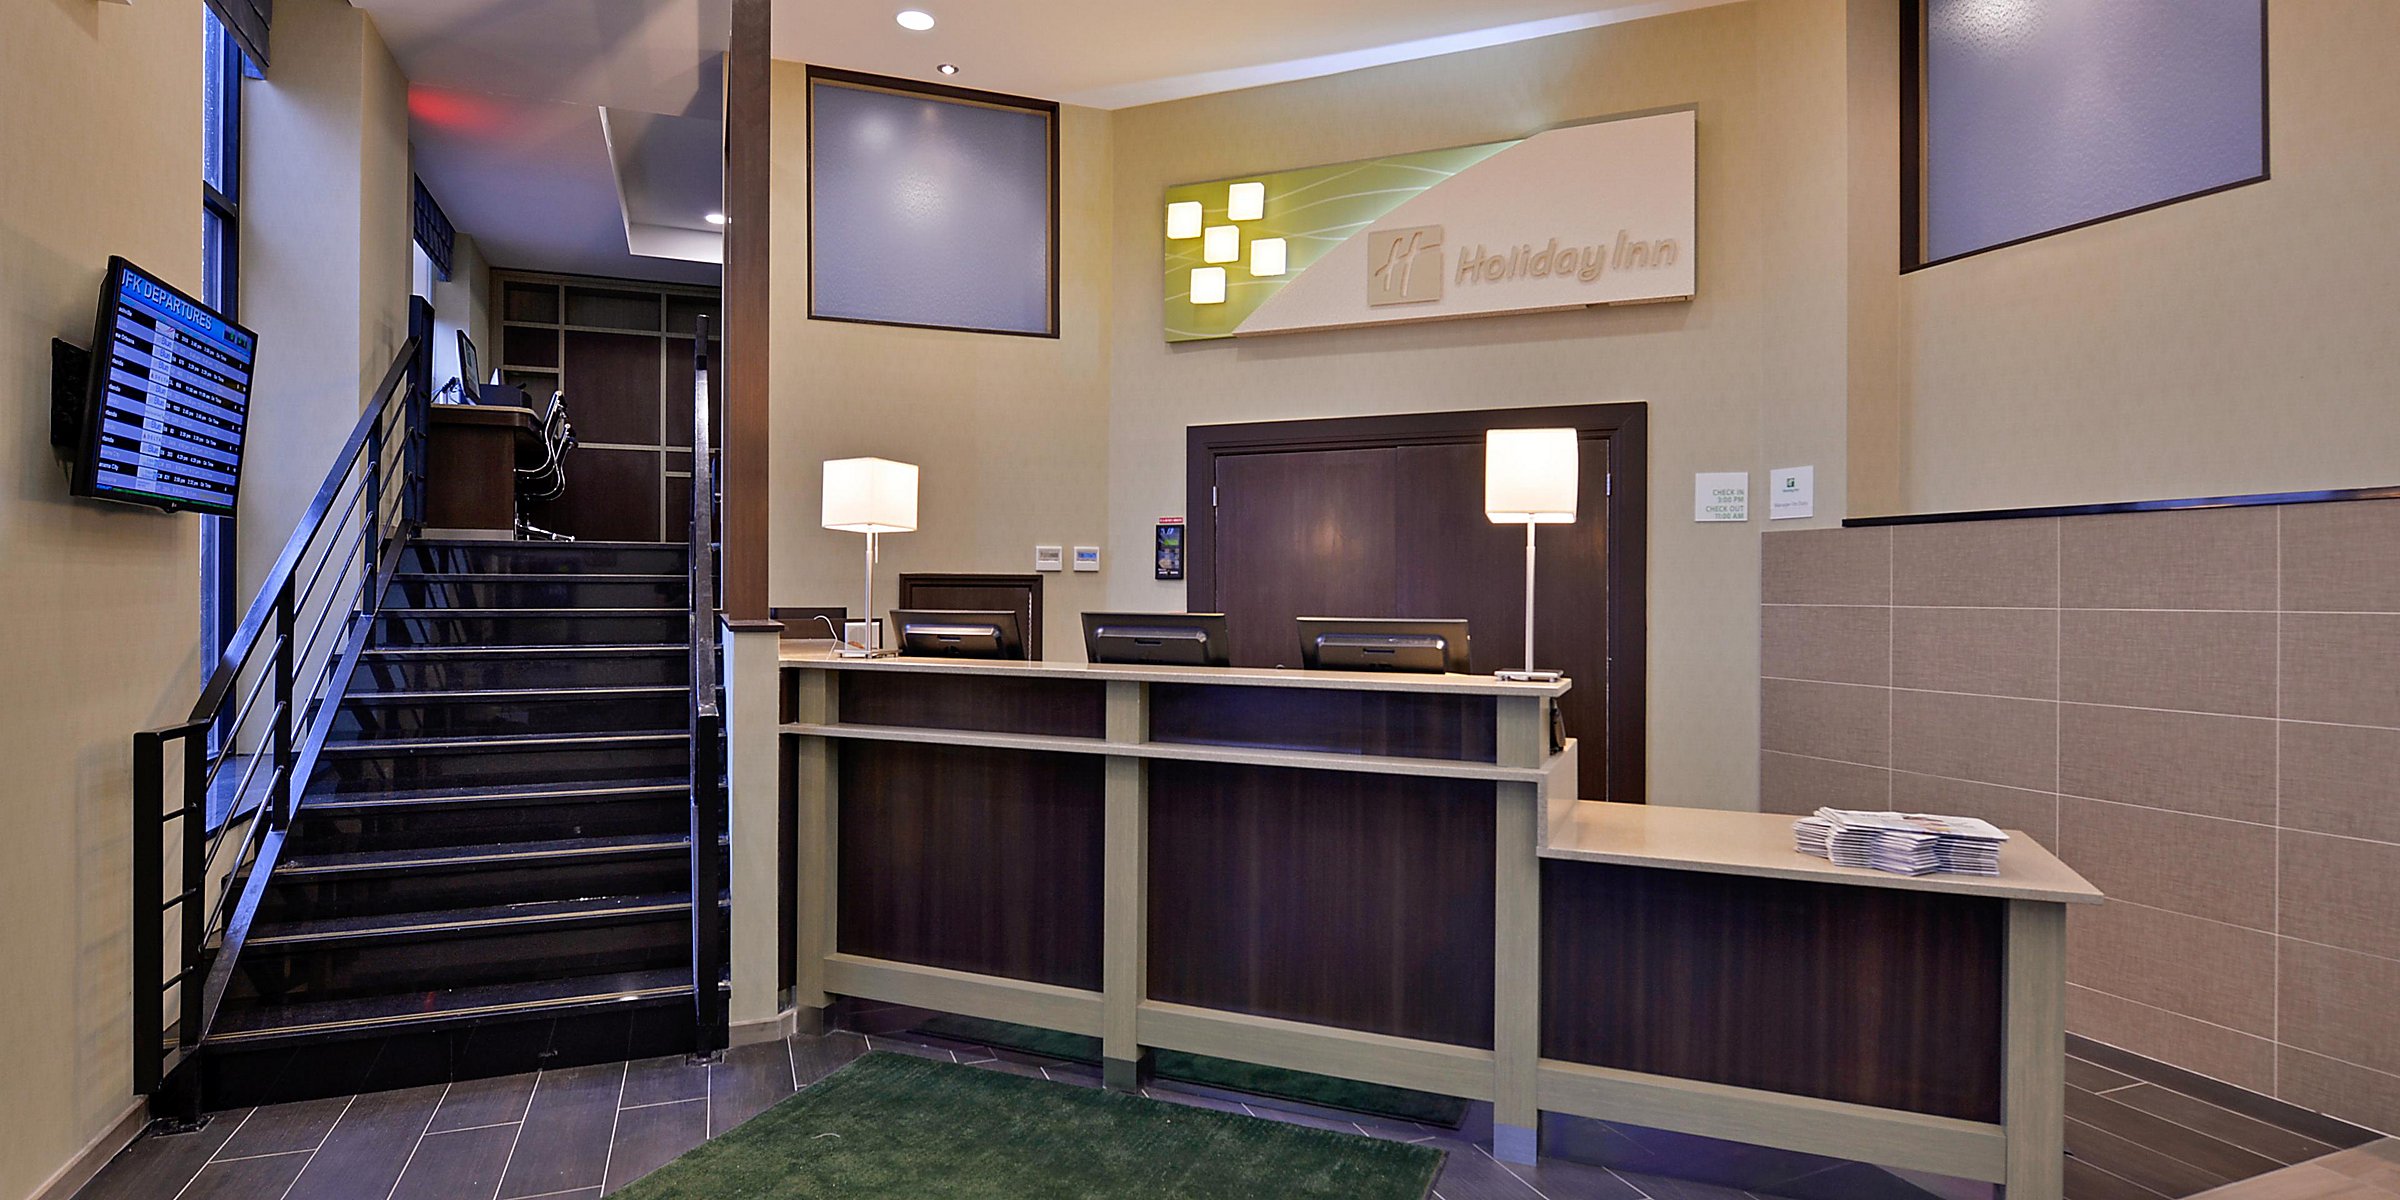 Jfk Airport Hotels In Queens Nyc Holiday Inn New York Jfk Airport